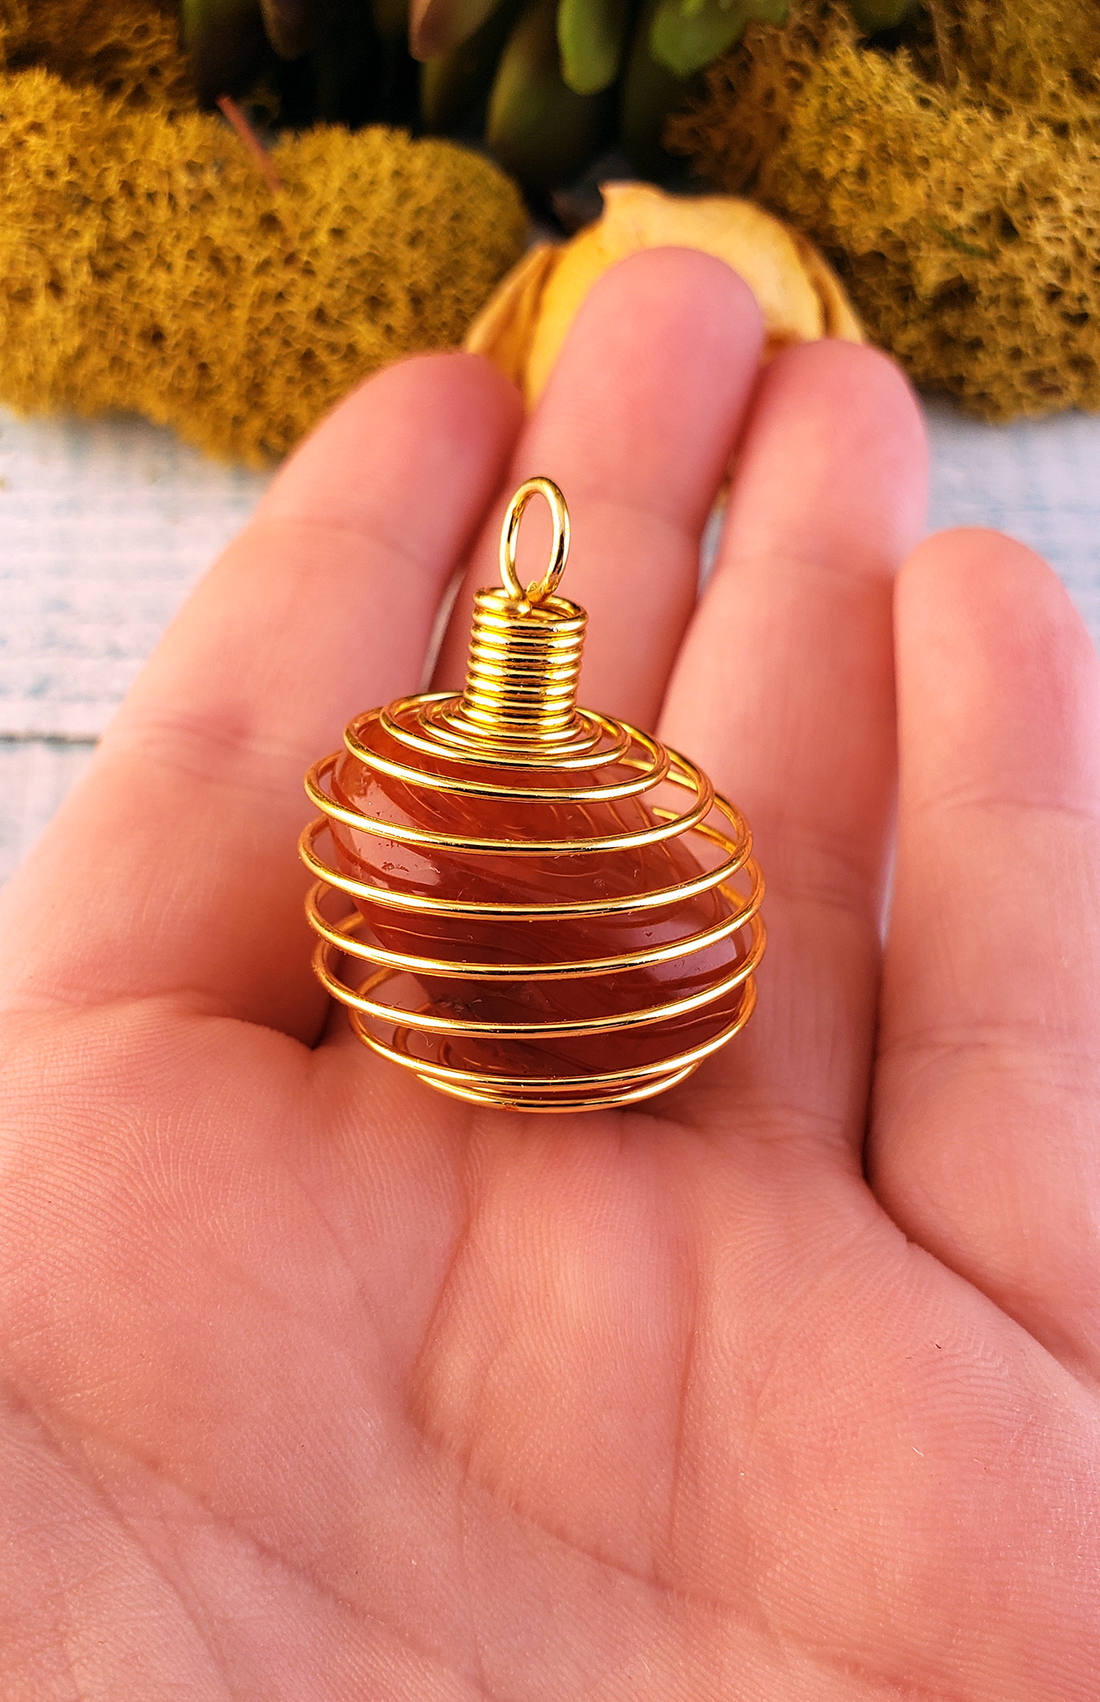 Gold-Colored Metal Spiral Cage Ornament Pendant - Perfect for Holding Gemstones or Orbs! - Carnelian in Pendant